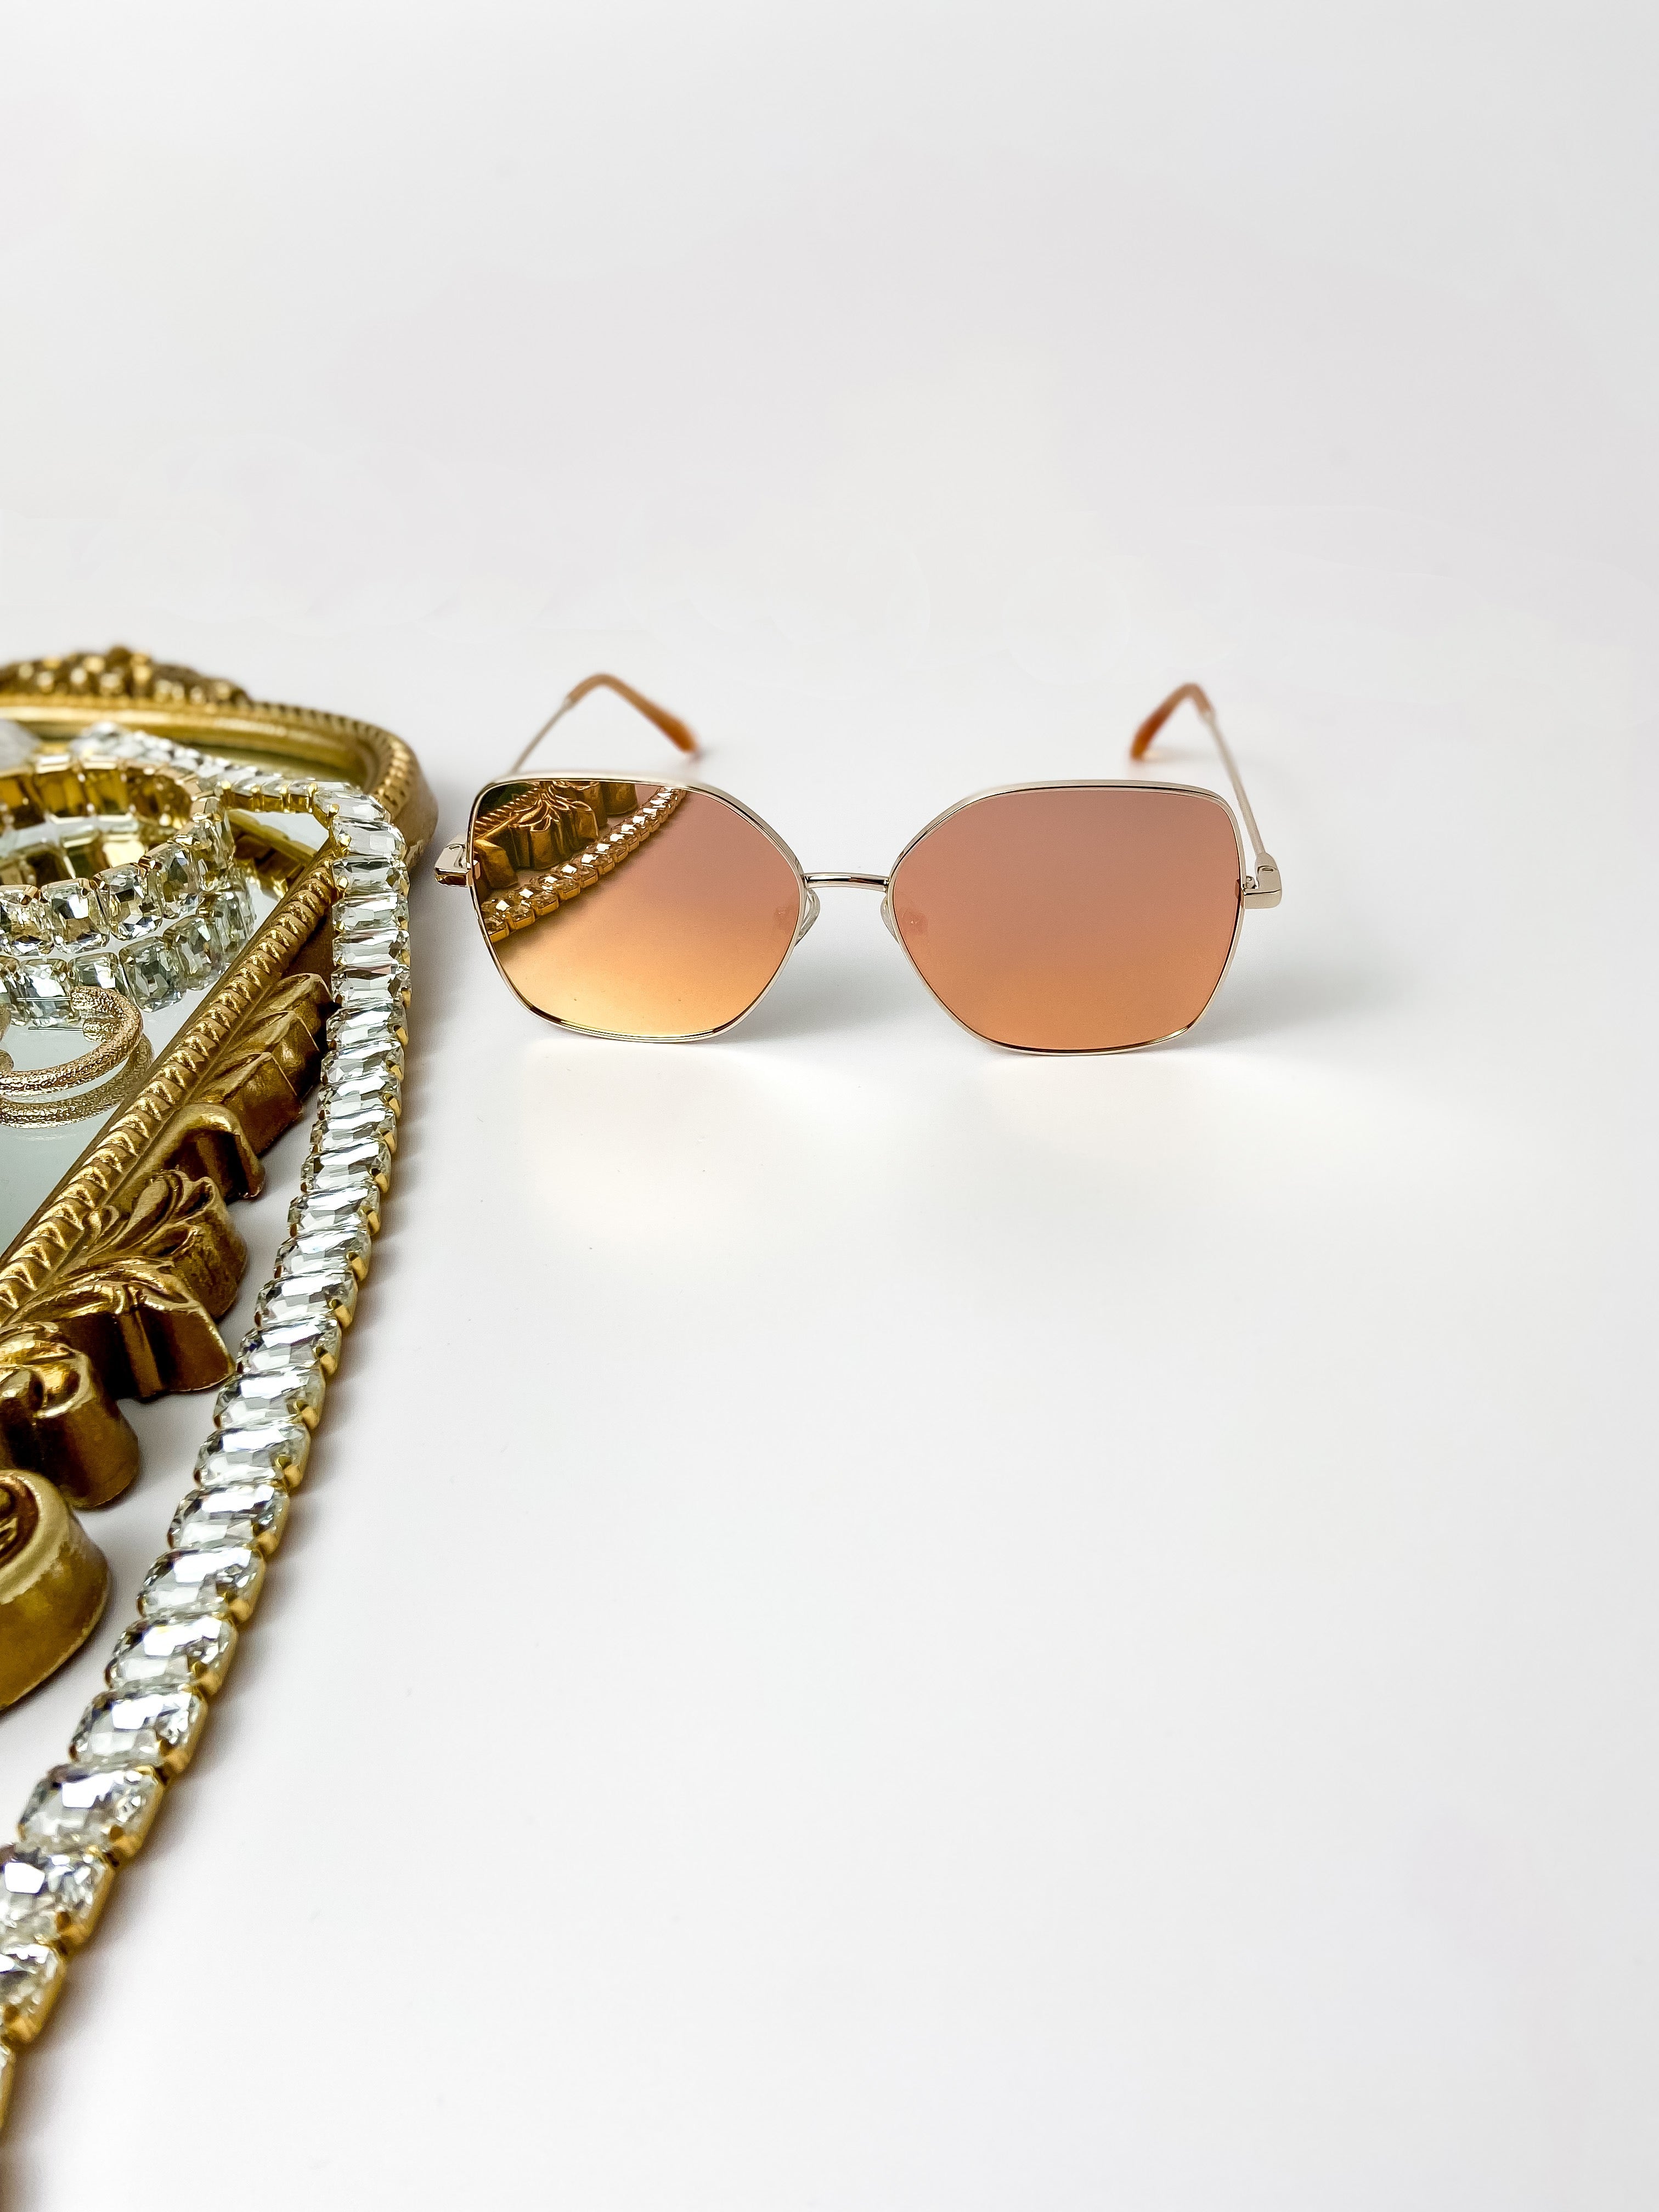 DIFF | Iris Peach Mirror Sunglasses in Gold Tone - Giddy Up Glamour Boutique